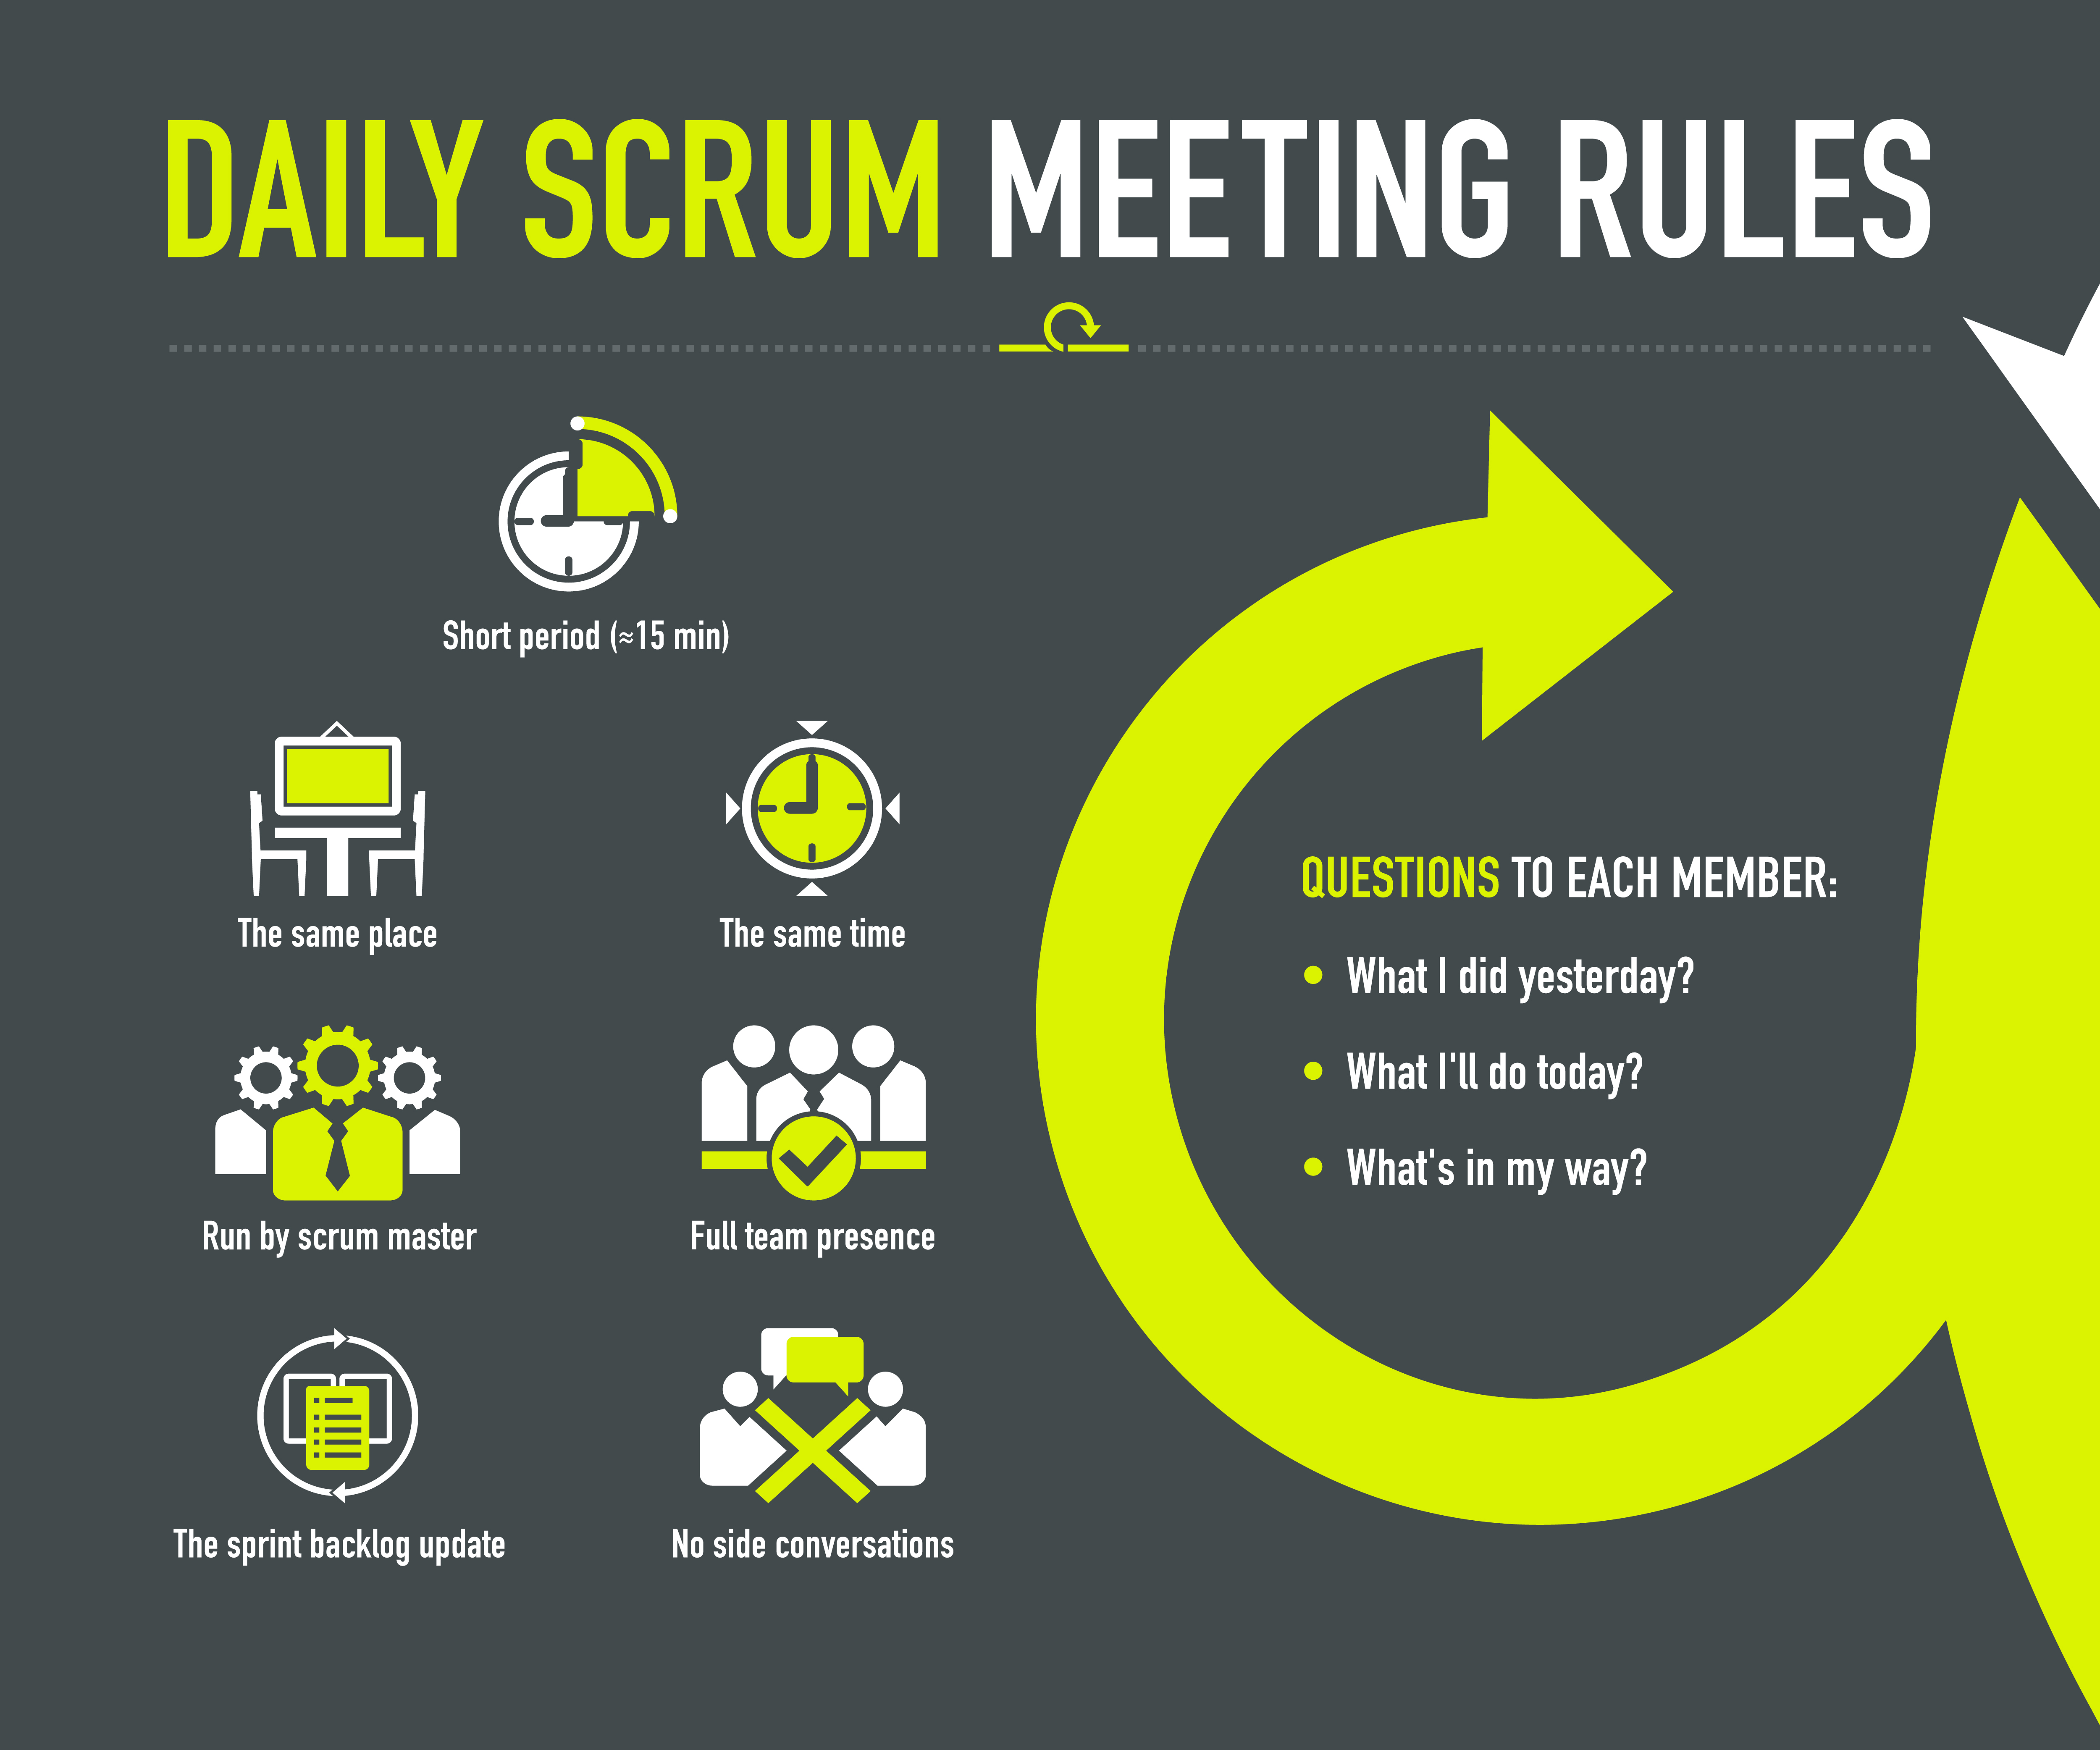 Daily-scrum-meeting-rules